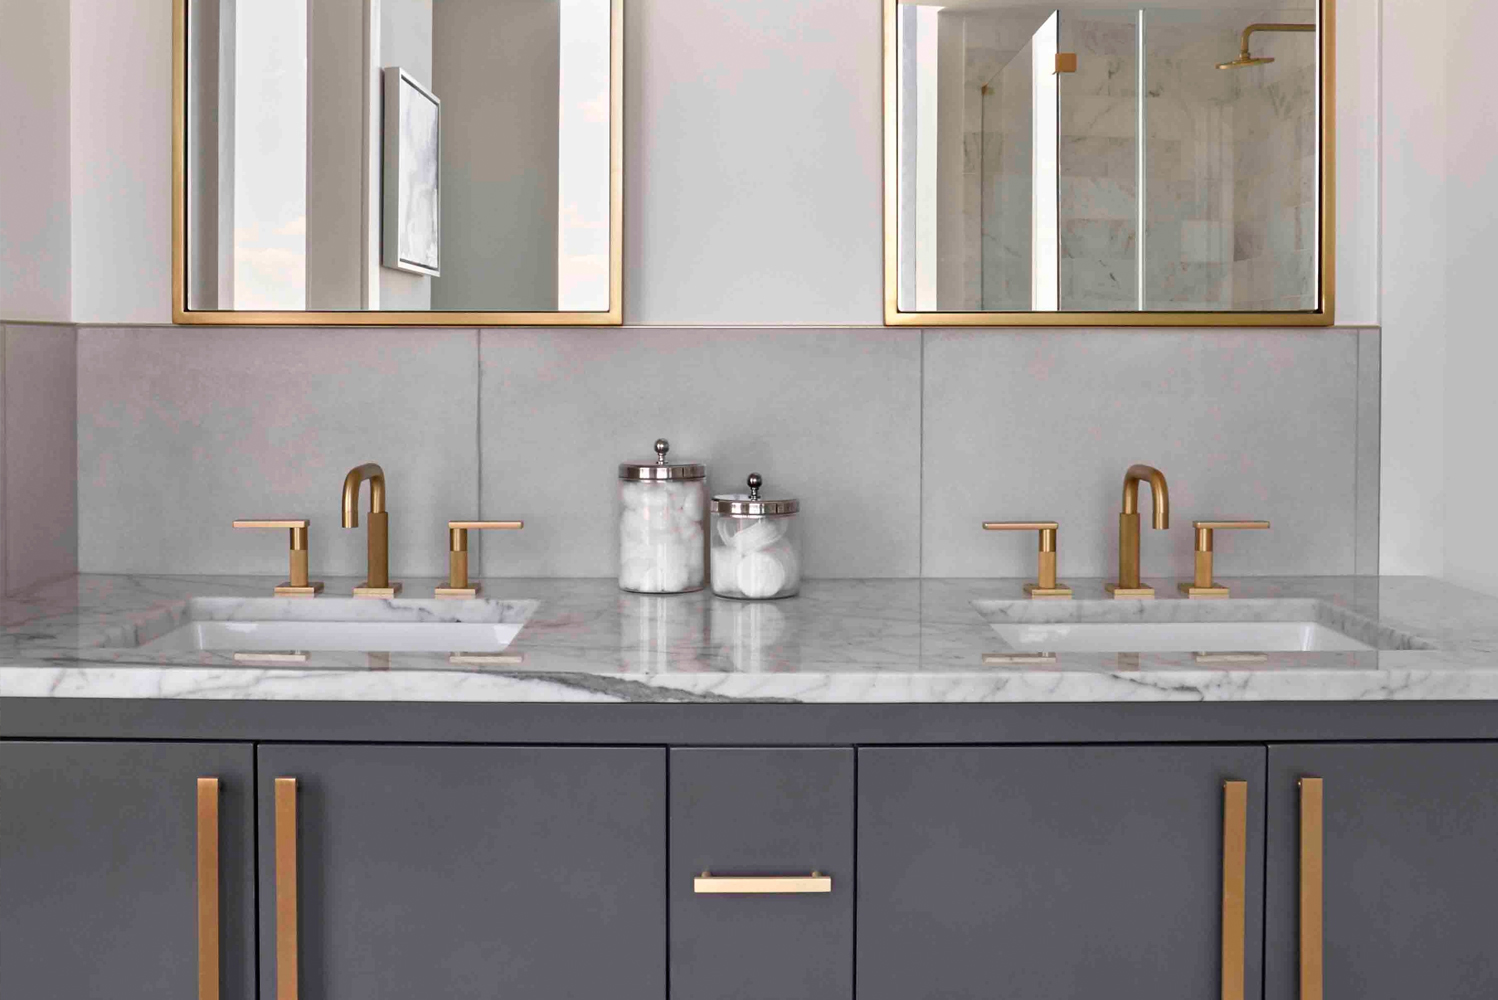 MarkZeff paired up with Watermark Designs to produce Rainey a collection of kitchen and bath trimming fixtures and faucets